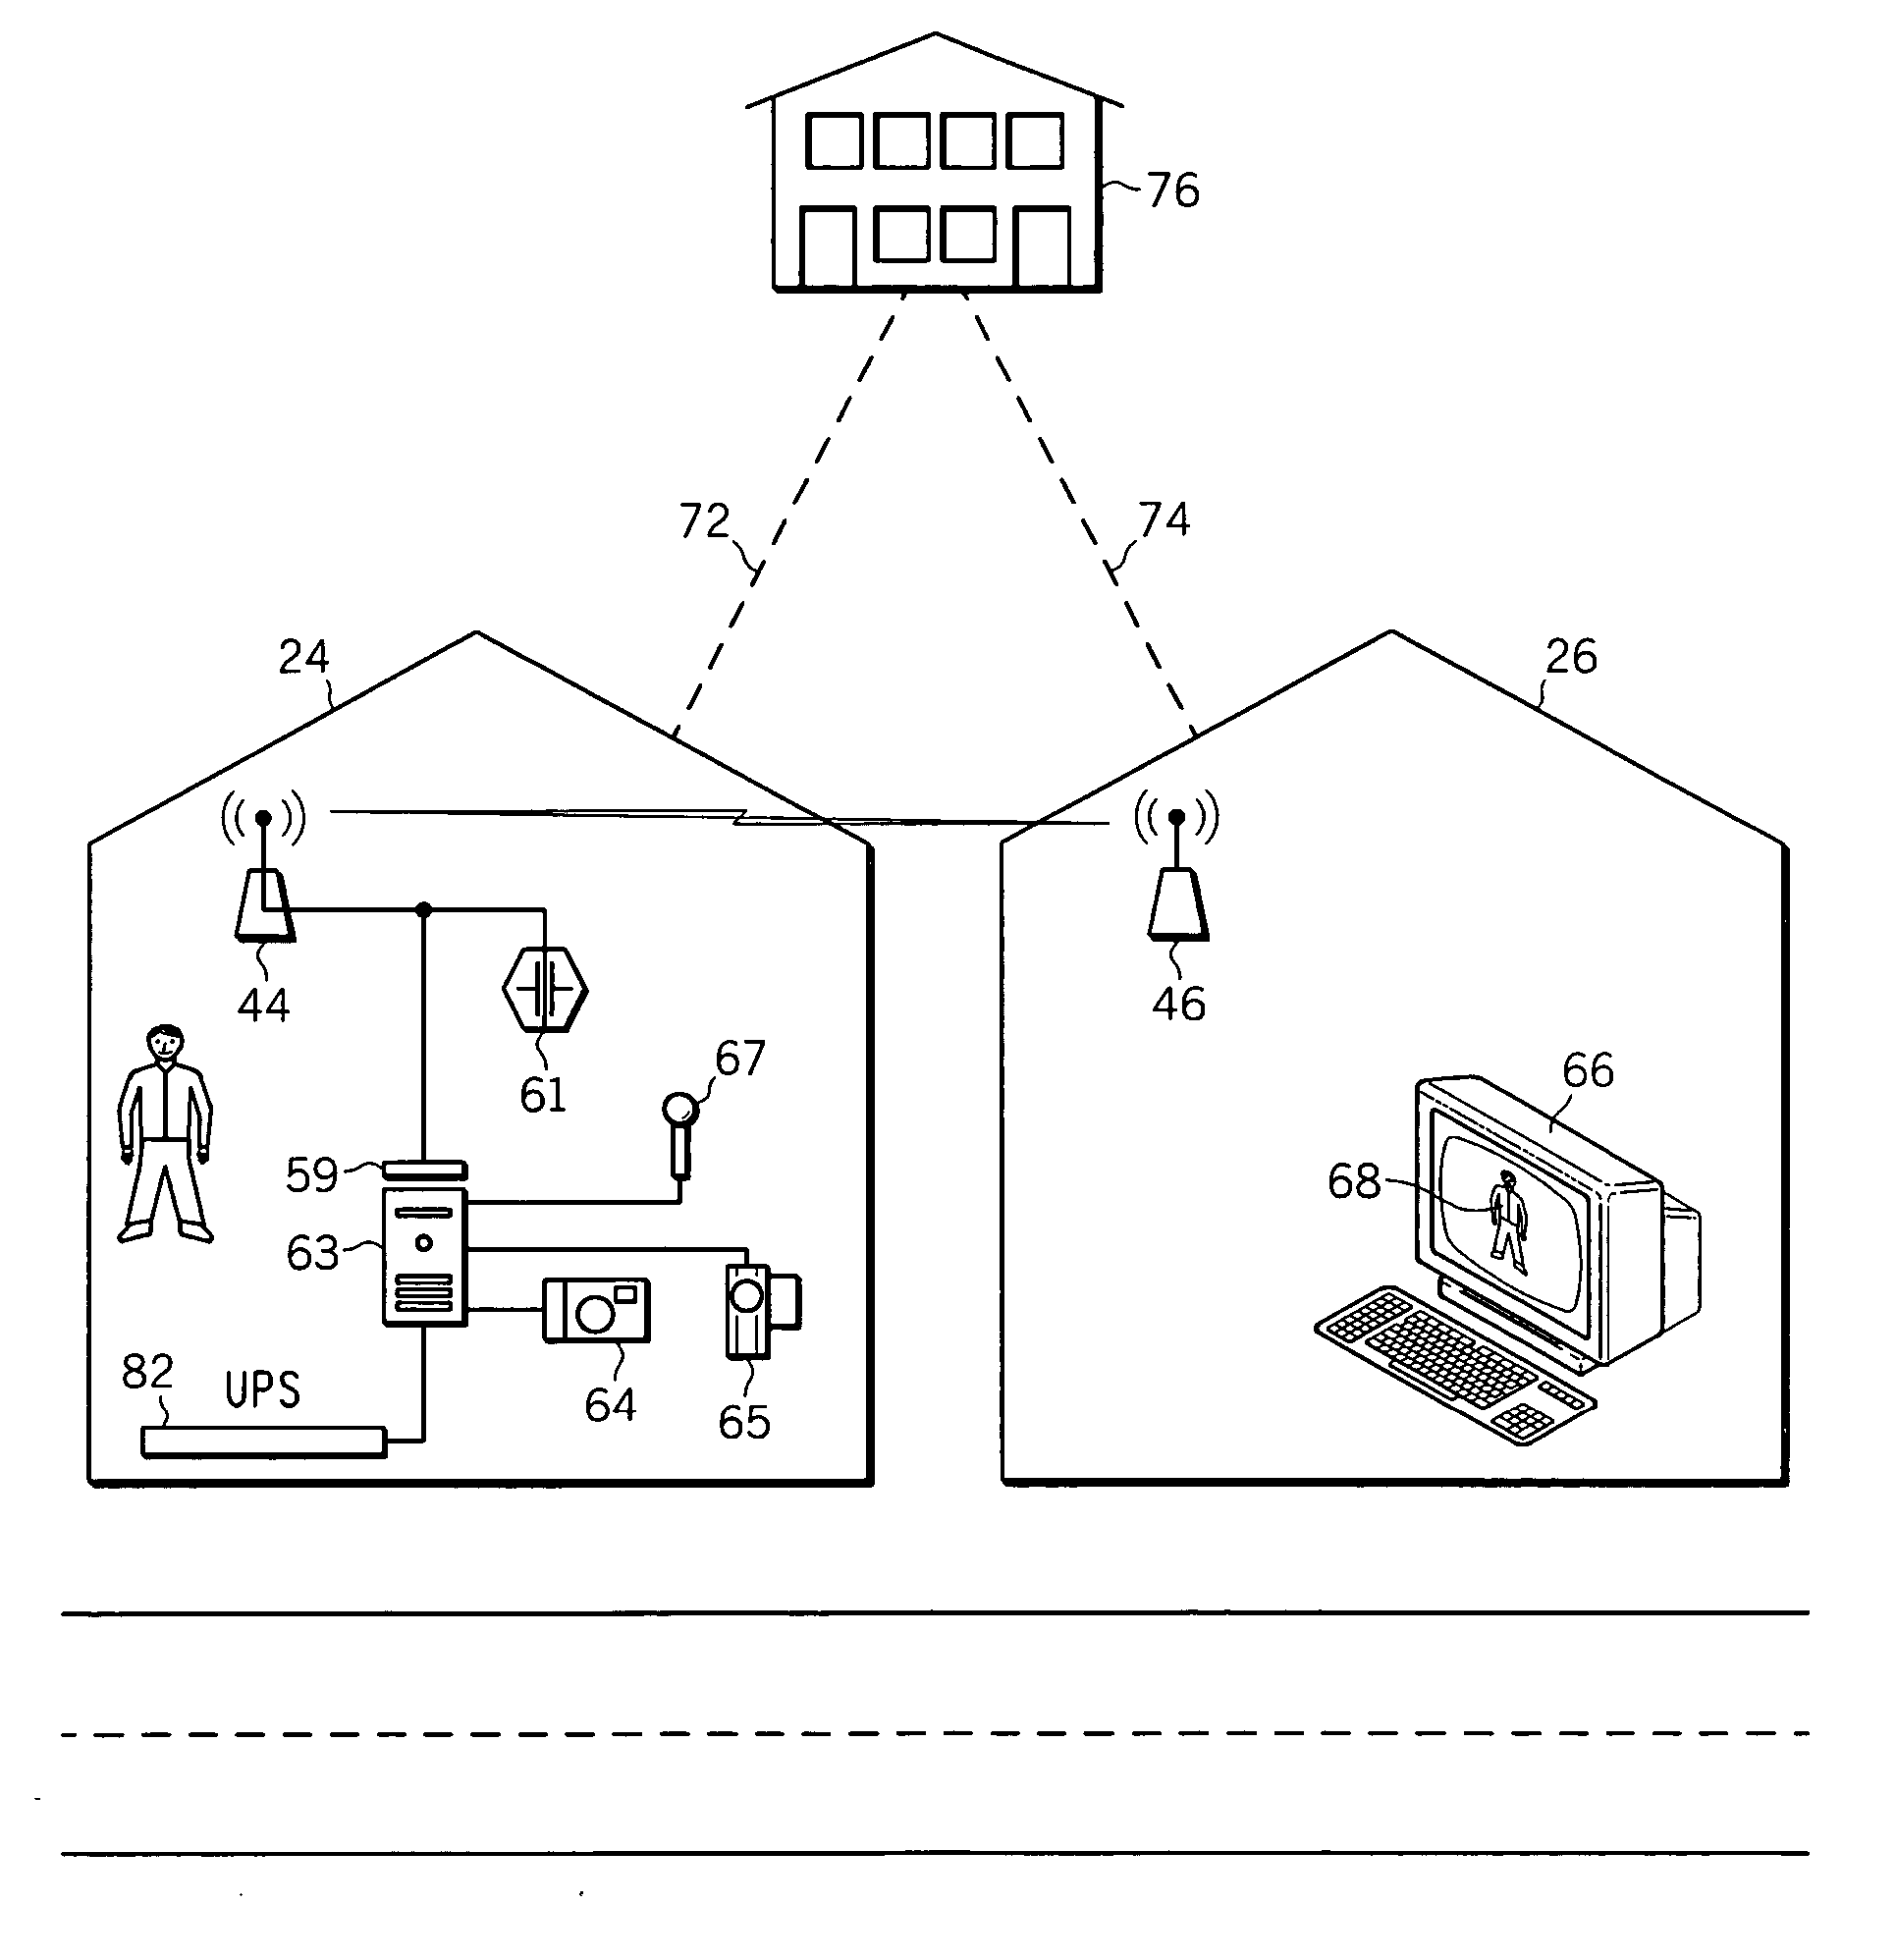 Home-monitoring system